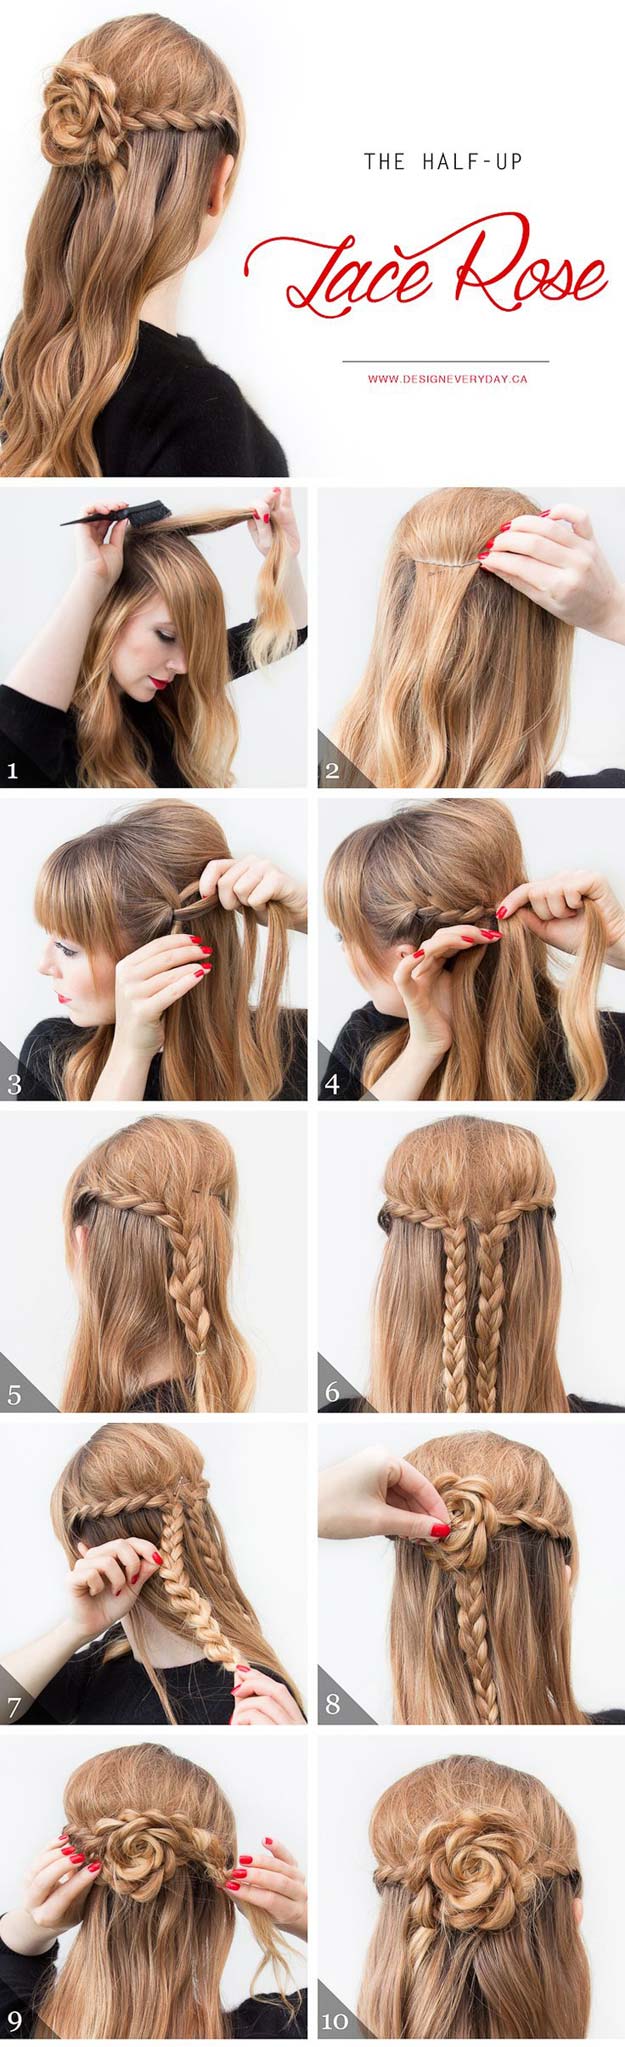 Cool and Easy DIY Hairstyles - The Half Up Lace Rose - Quick and Easy Ideas for Back to School Styles for Medium, Short and Long Hair - Fun Tips and Best Step by Step Tutorials for Teens, Prom, Weddings, Special Occasions and Work. Up dos, Braids, Top Knots and Buns, Super Summer Looks #hairstyles #hair #teens #easyhairstyles #diy #beauty